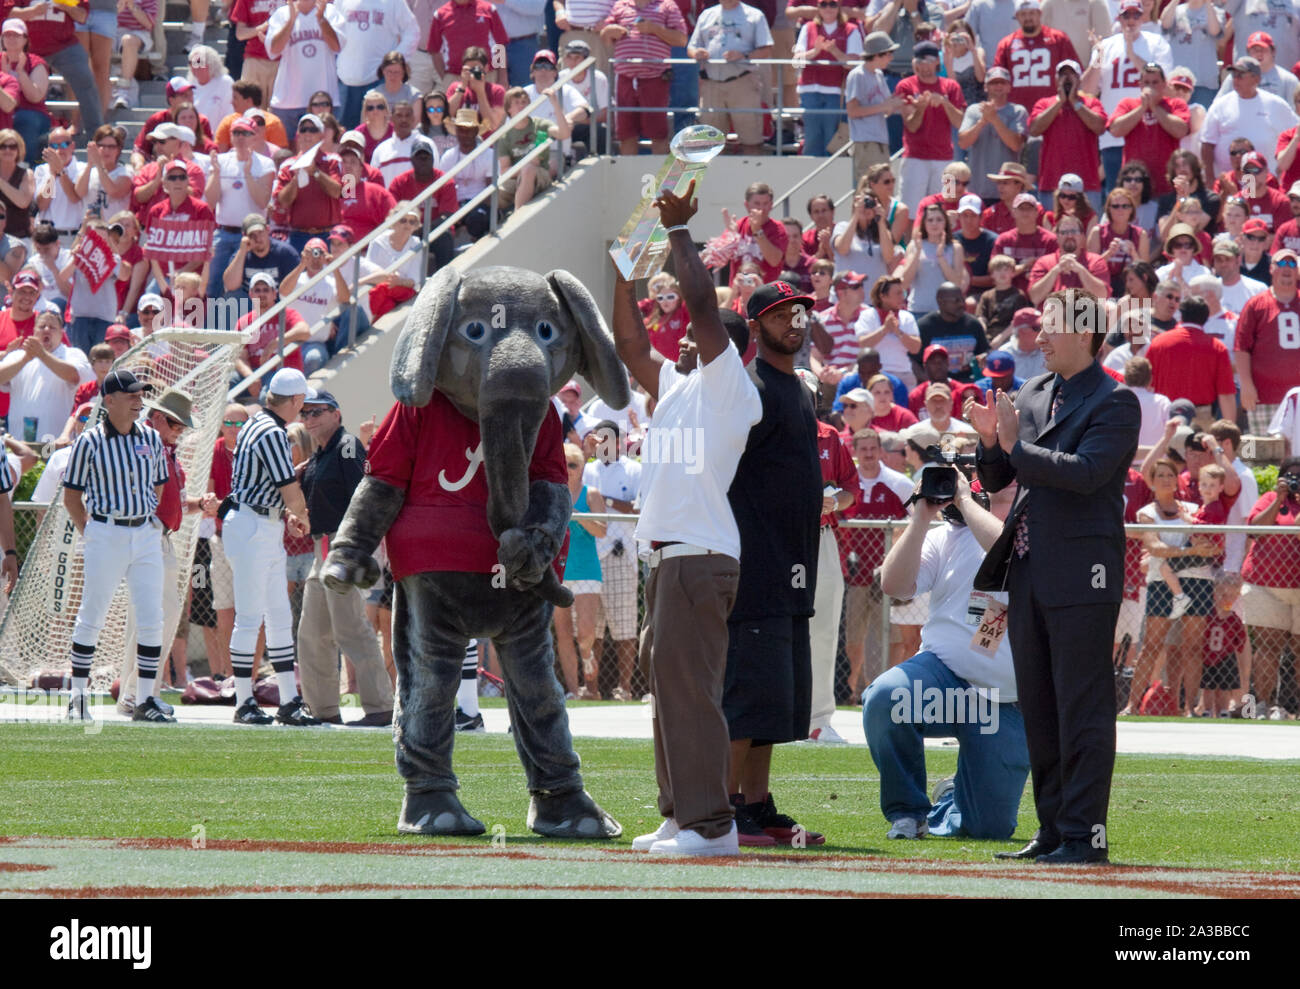 Since the 1930s, Big Al, the Alabama Crimson Tide Football team mascot has been there to cheer the team on to victory. University of Alabama, Tuscaloosa, Alabama Stock Photo